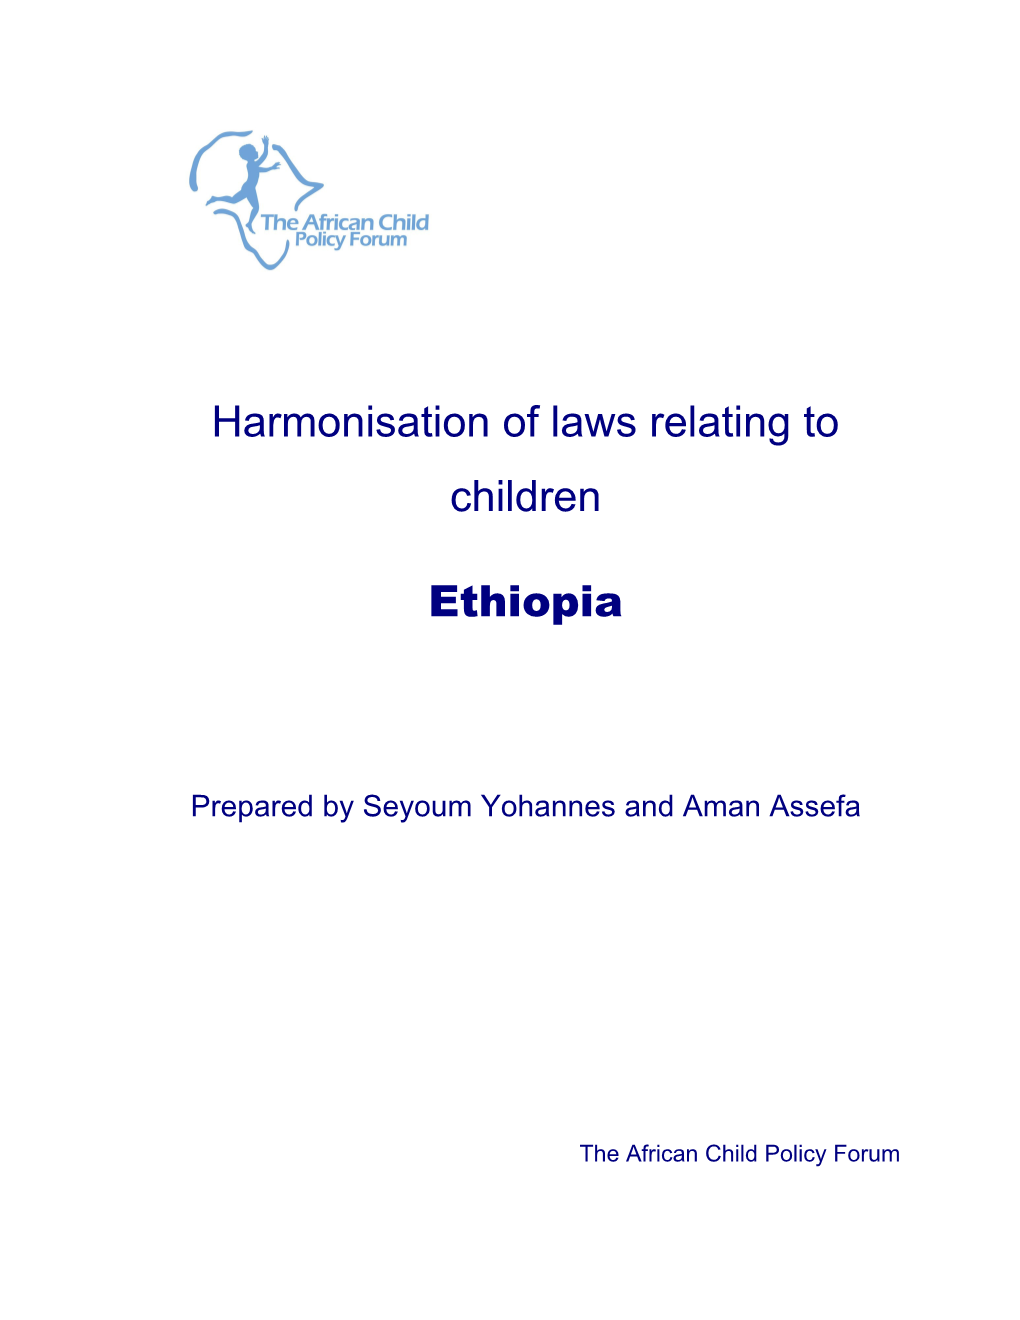 Brief Survey of Ethiopian Laws in Light of the UN Convention on the Rights of the Child